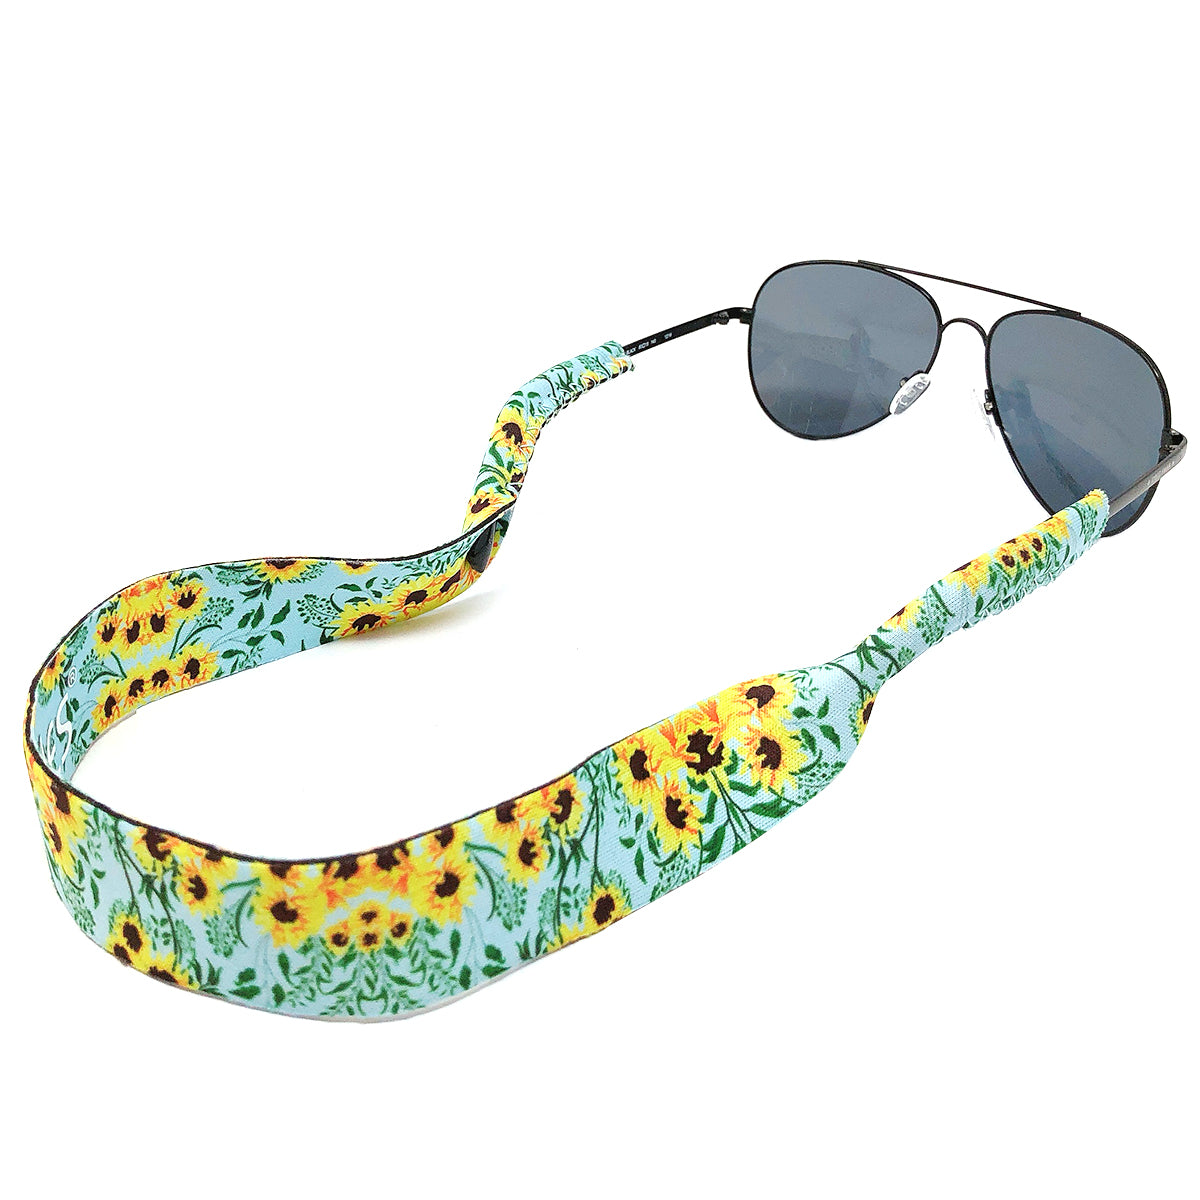 Wrapables Adjustable Eyewear Retainer, Sunglass Strap with Neoprene Floating Material for Sports and Outdoors Sunflowers Sky Blue